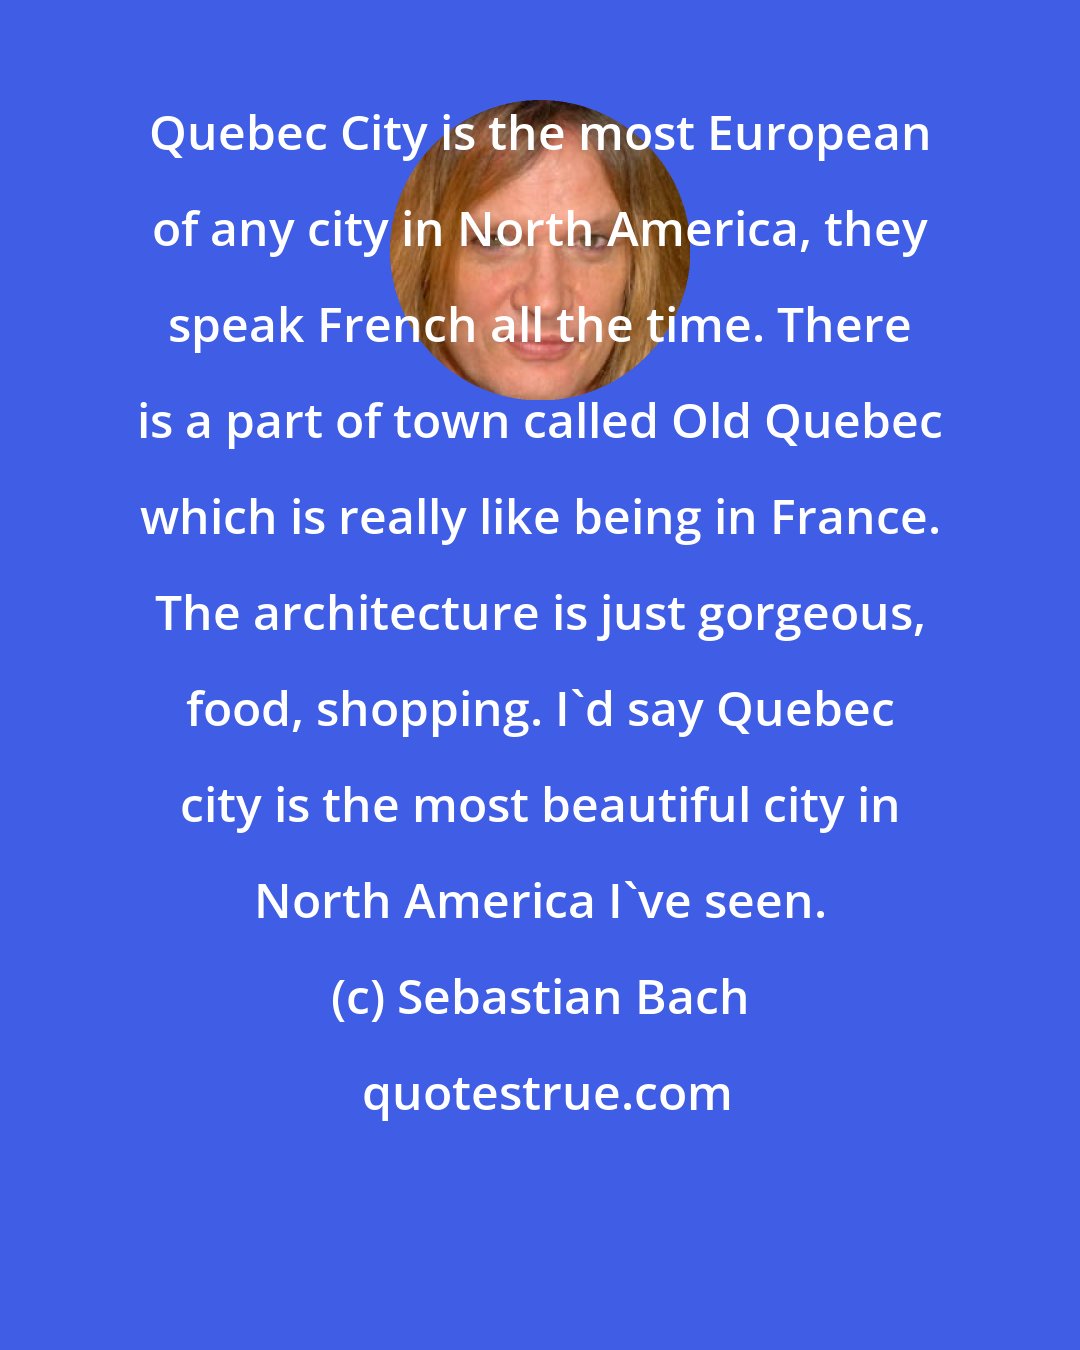 Sebastian Bach: Quebec City is the most European of any city in North America, they speak French all the time. There is a part of town called Old Quebec which is really like being in France. The architecture is just gorgeous, food, shopping. I'd say Quebec city is the most beautiful city in North America I've seen.